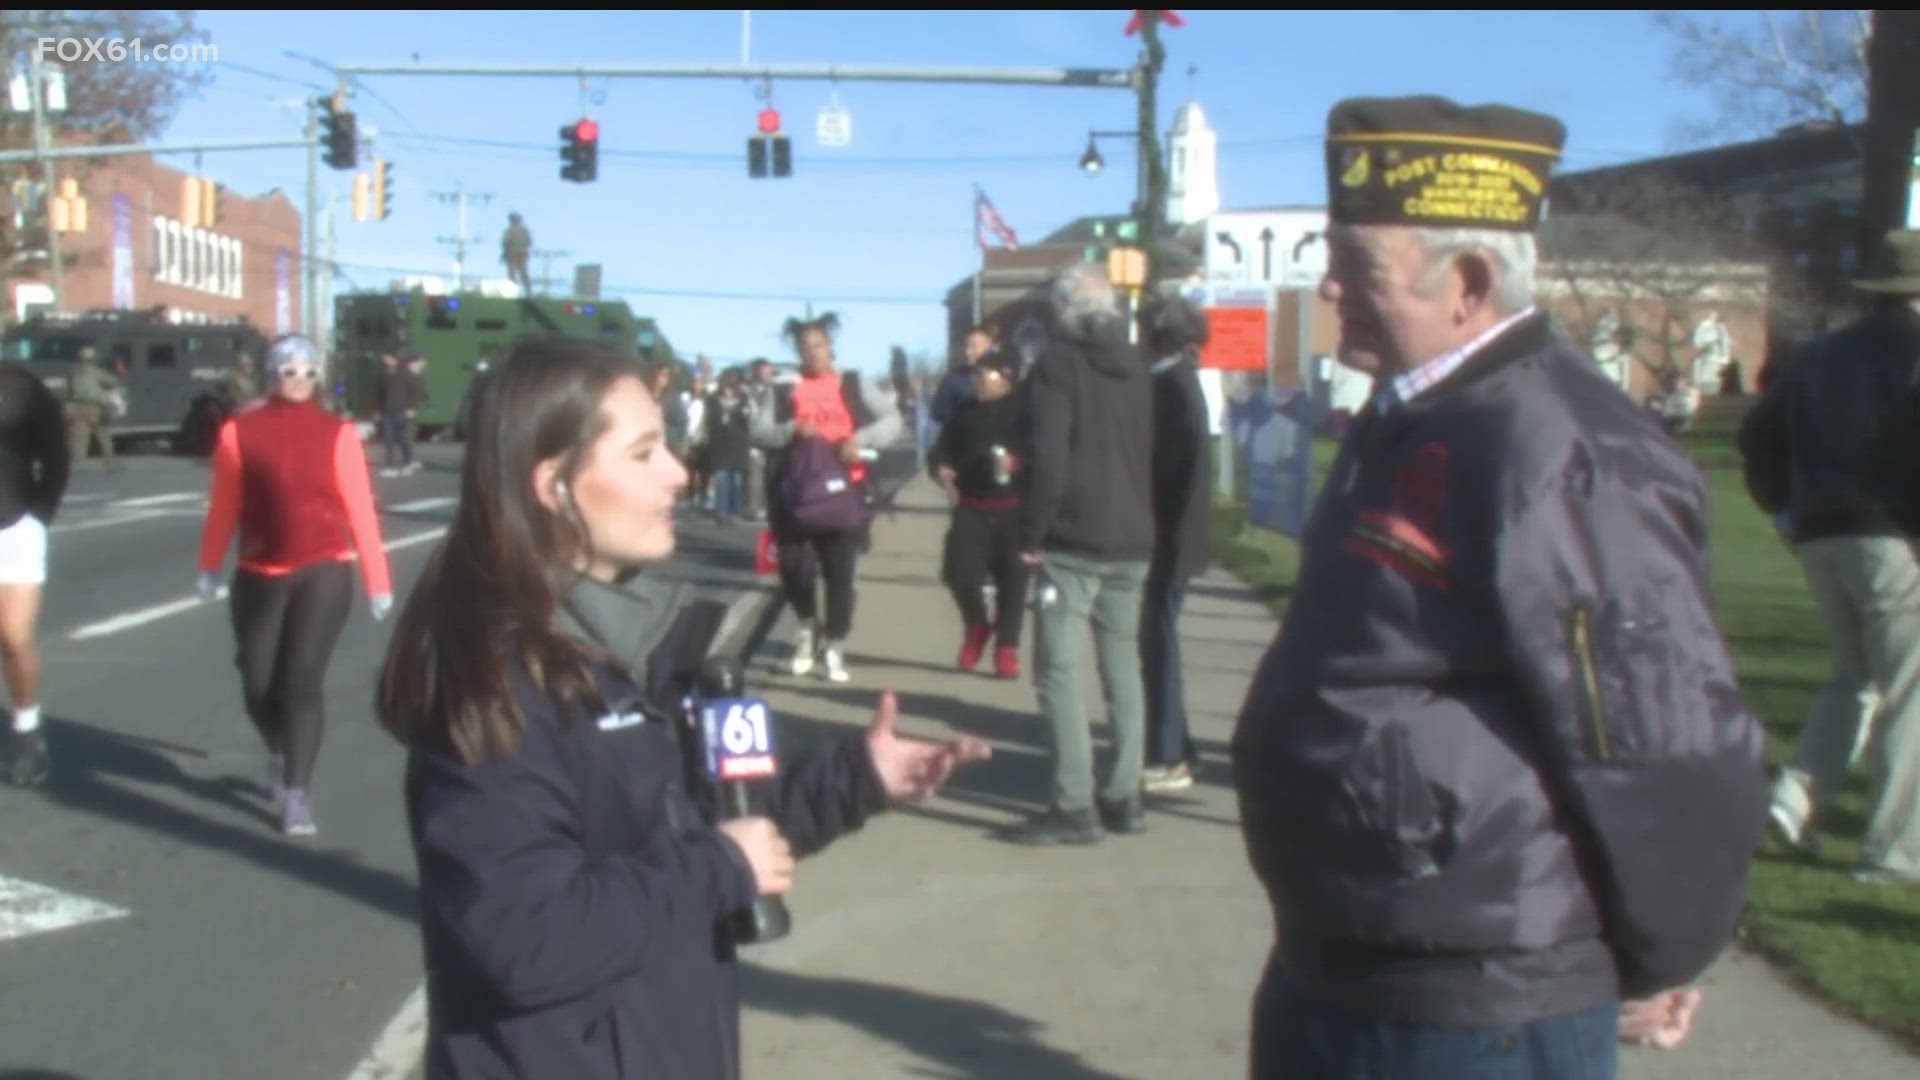 FOX61's Brooke Griffin discusses the Manchester Road Race honoring veterans with Paul, a Vietnam War veteran.